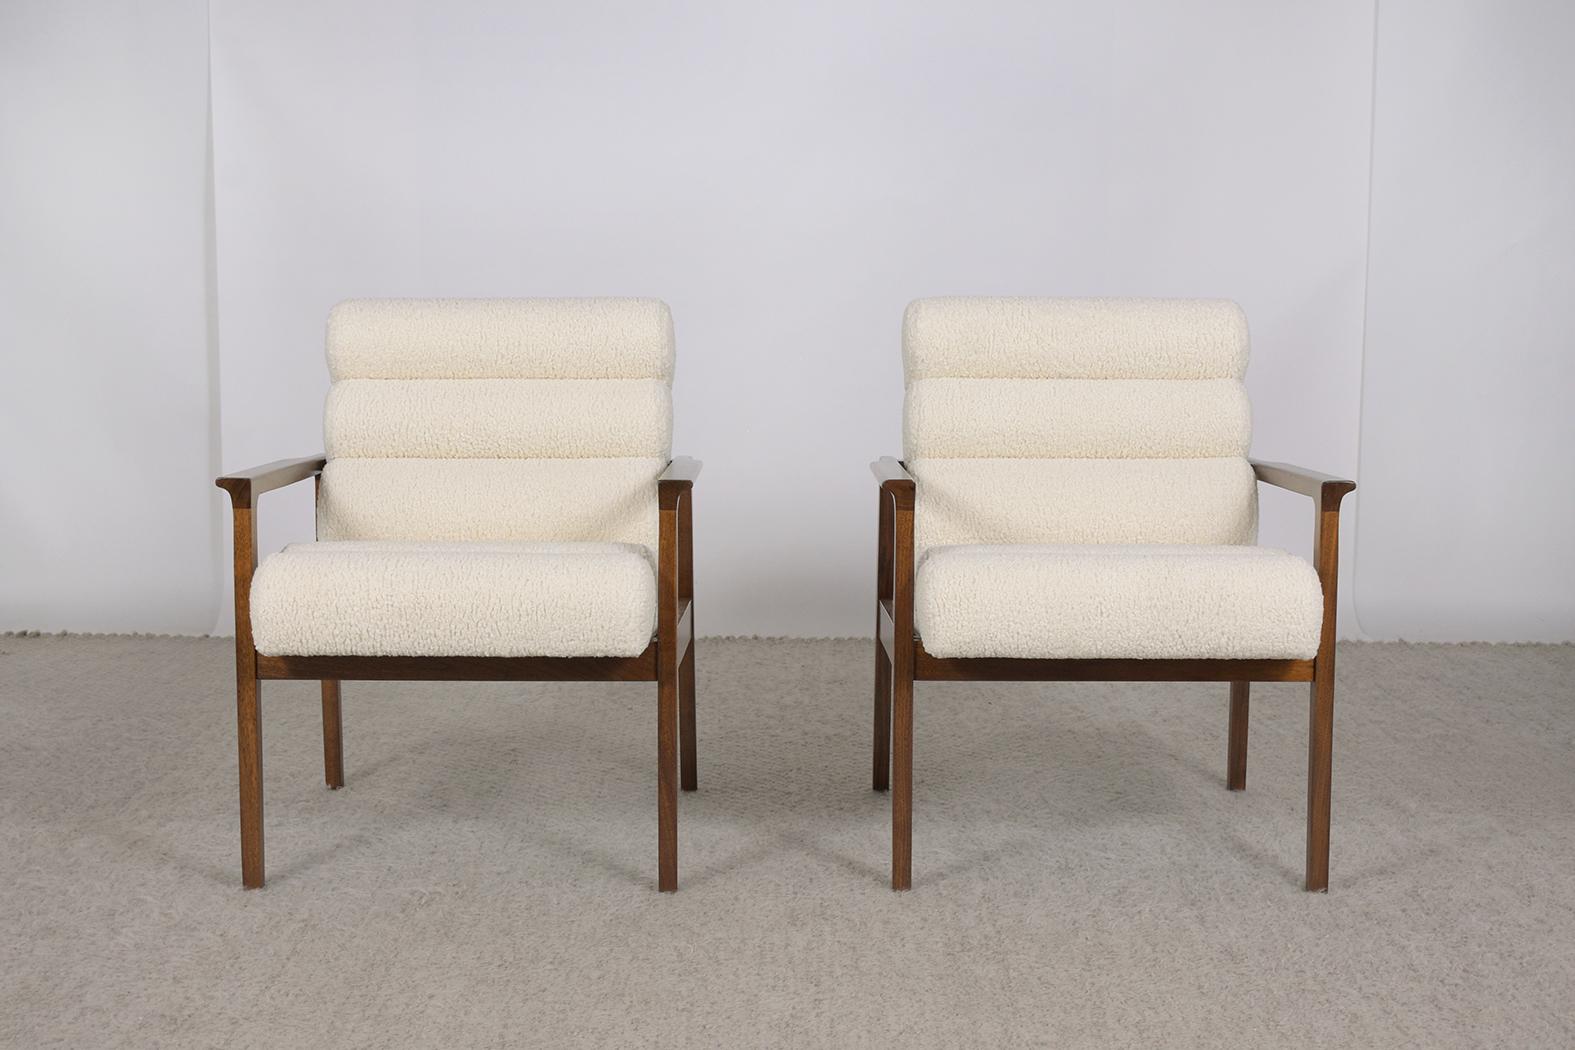 An extraordinary pair of modern armchairs hand-crafted out of walnut in great condition and newly restored by our professional craftsmen team. These fabulous lounge chairs feature a sleek walnut frame beautifully stained rich walnut color with a